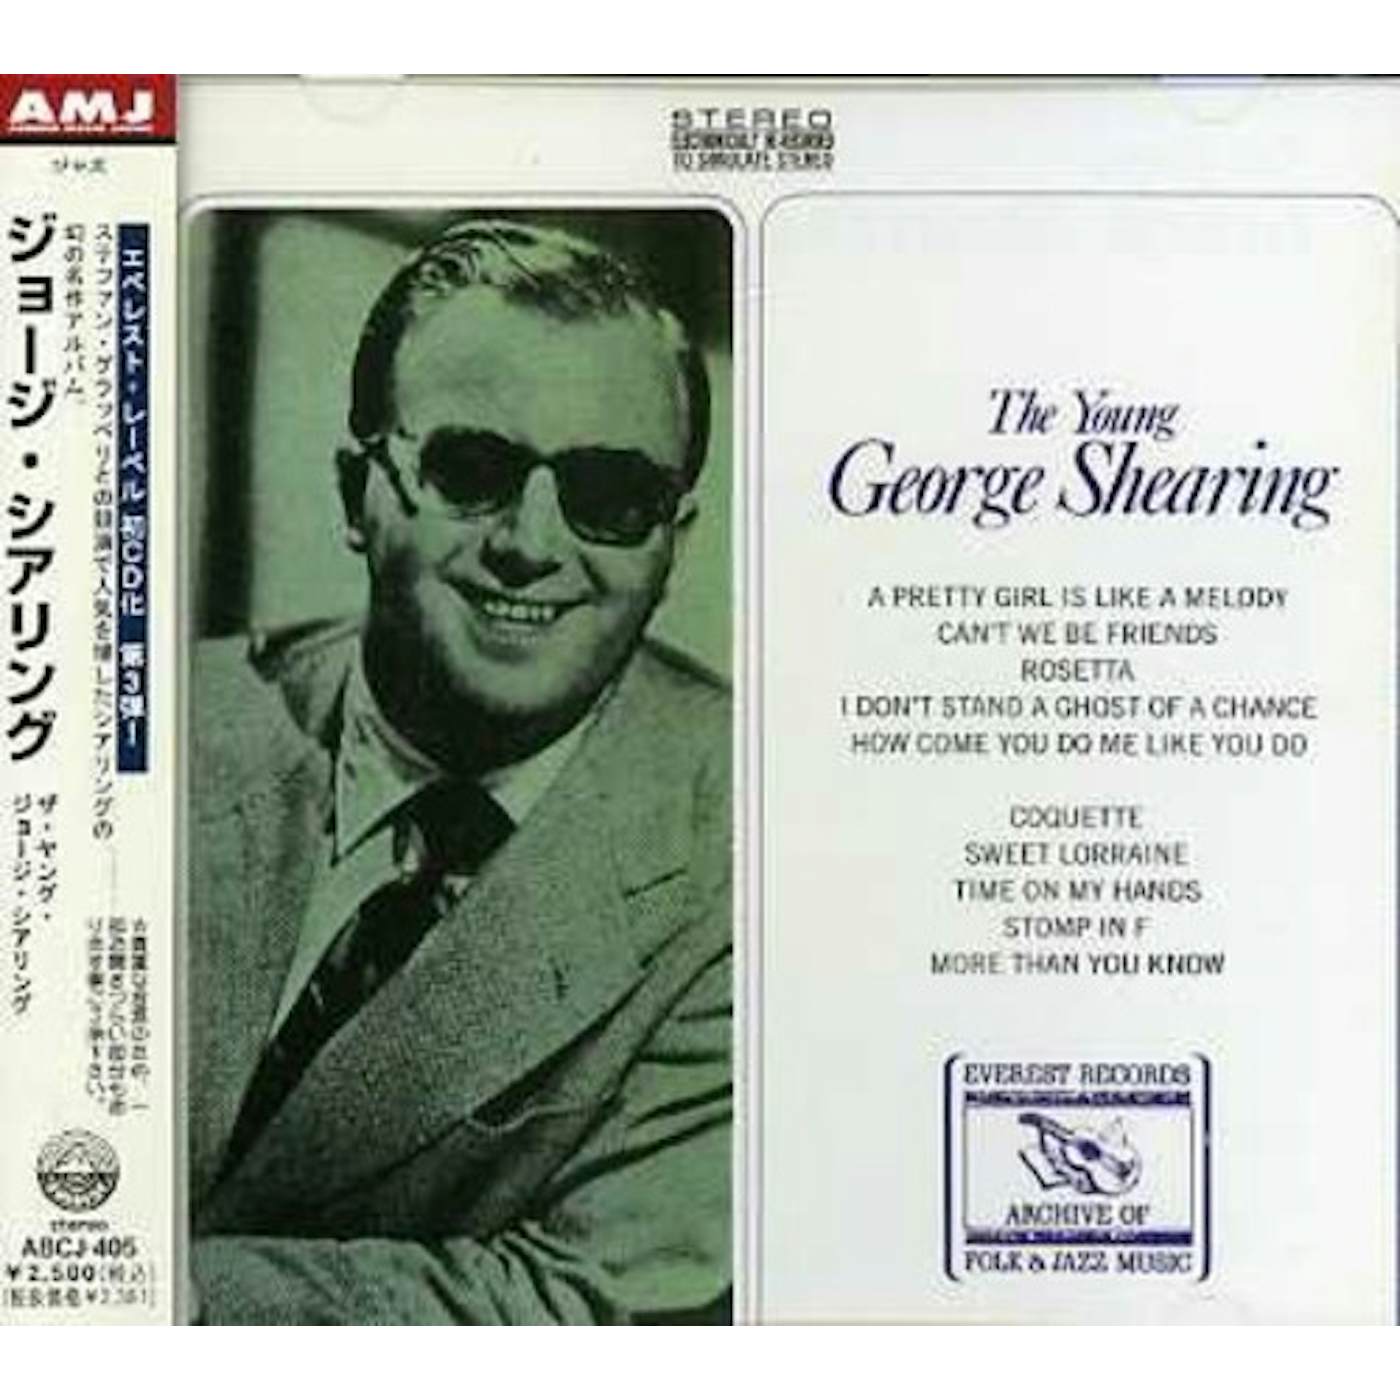 George Shearing YOUNG CD